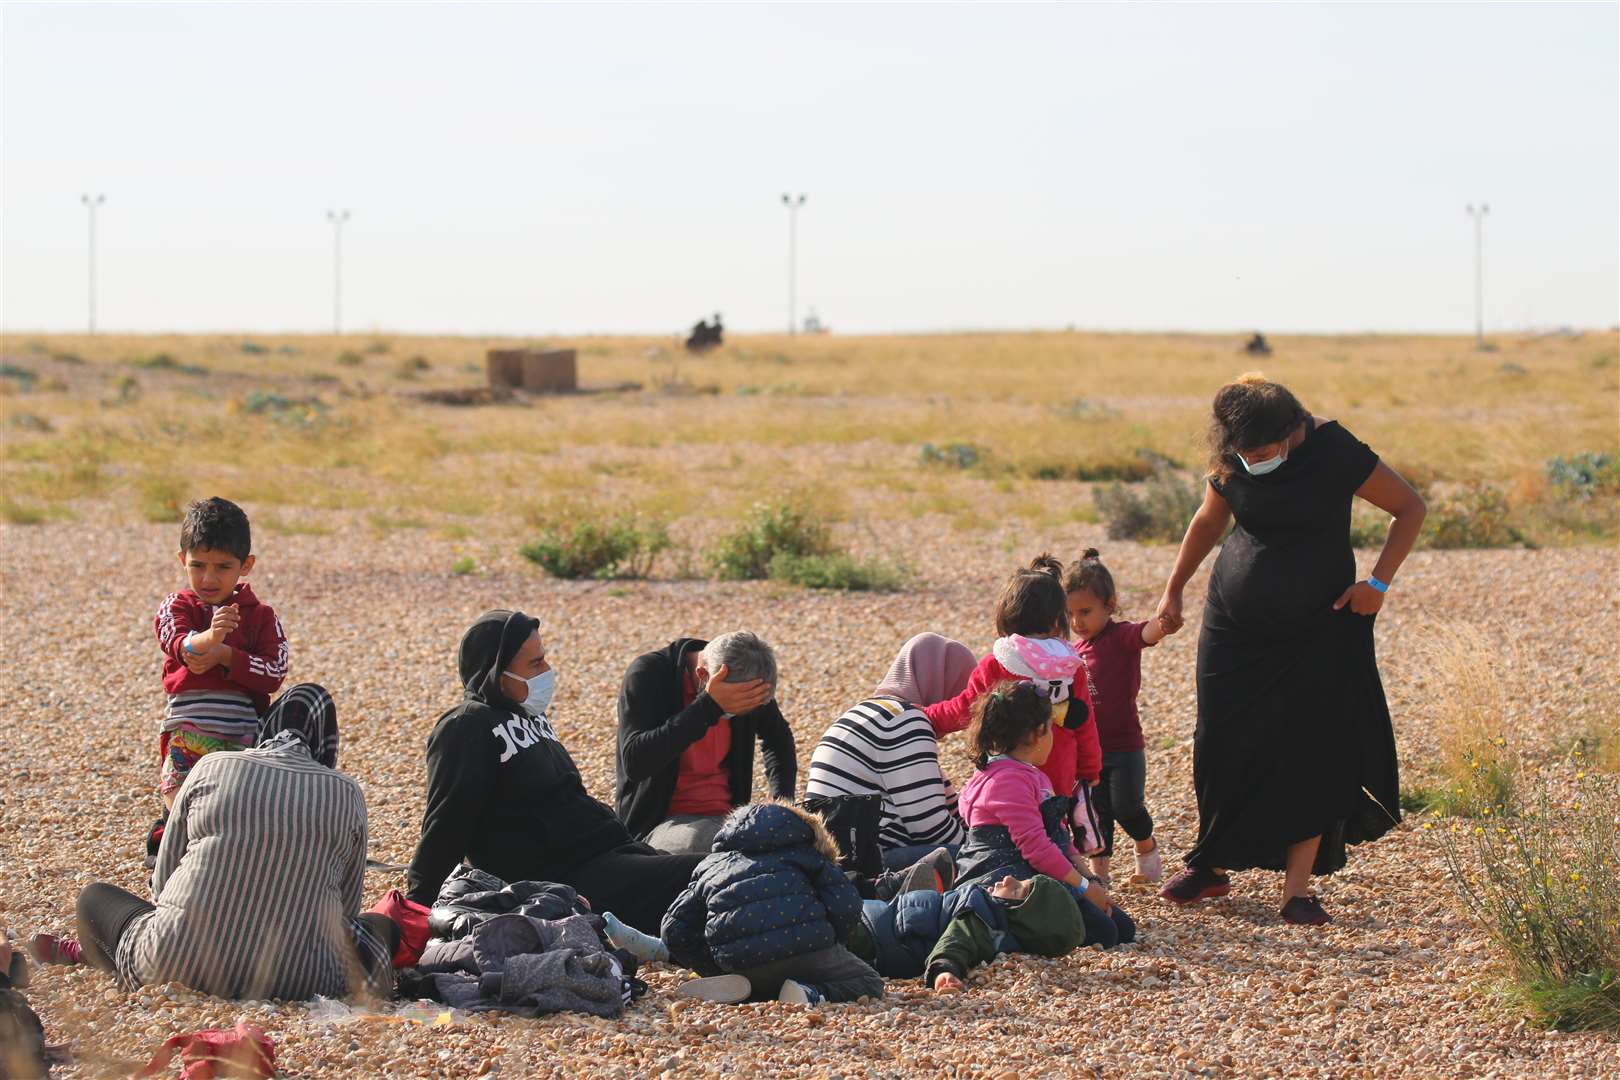 Asylum seekers landing at Dungeness last year, including children. Picture: Susan Pilcher